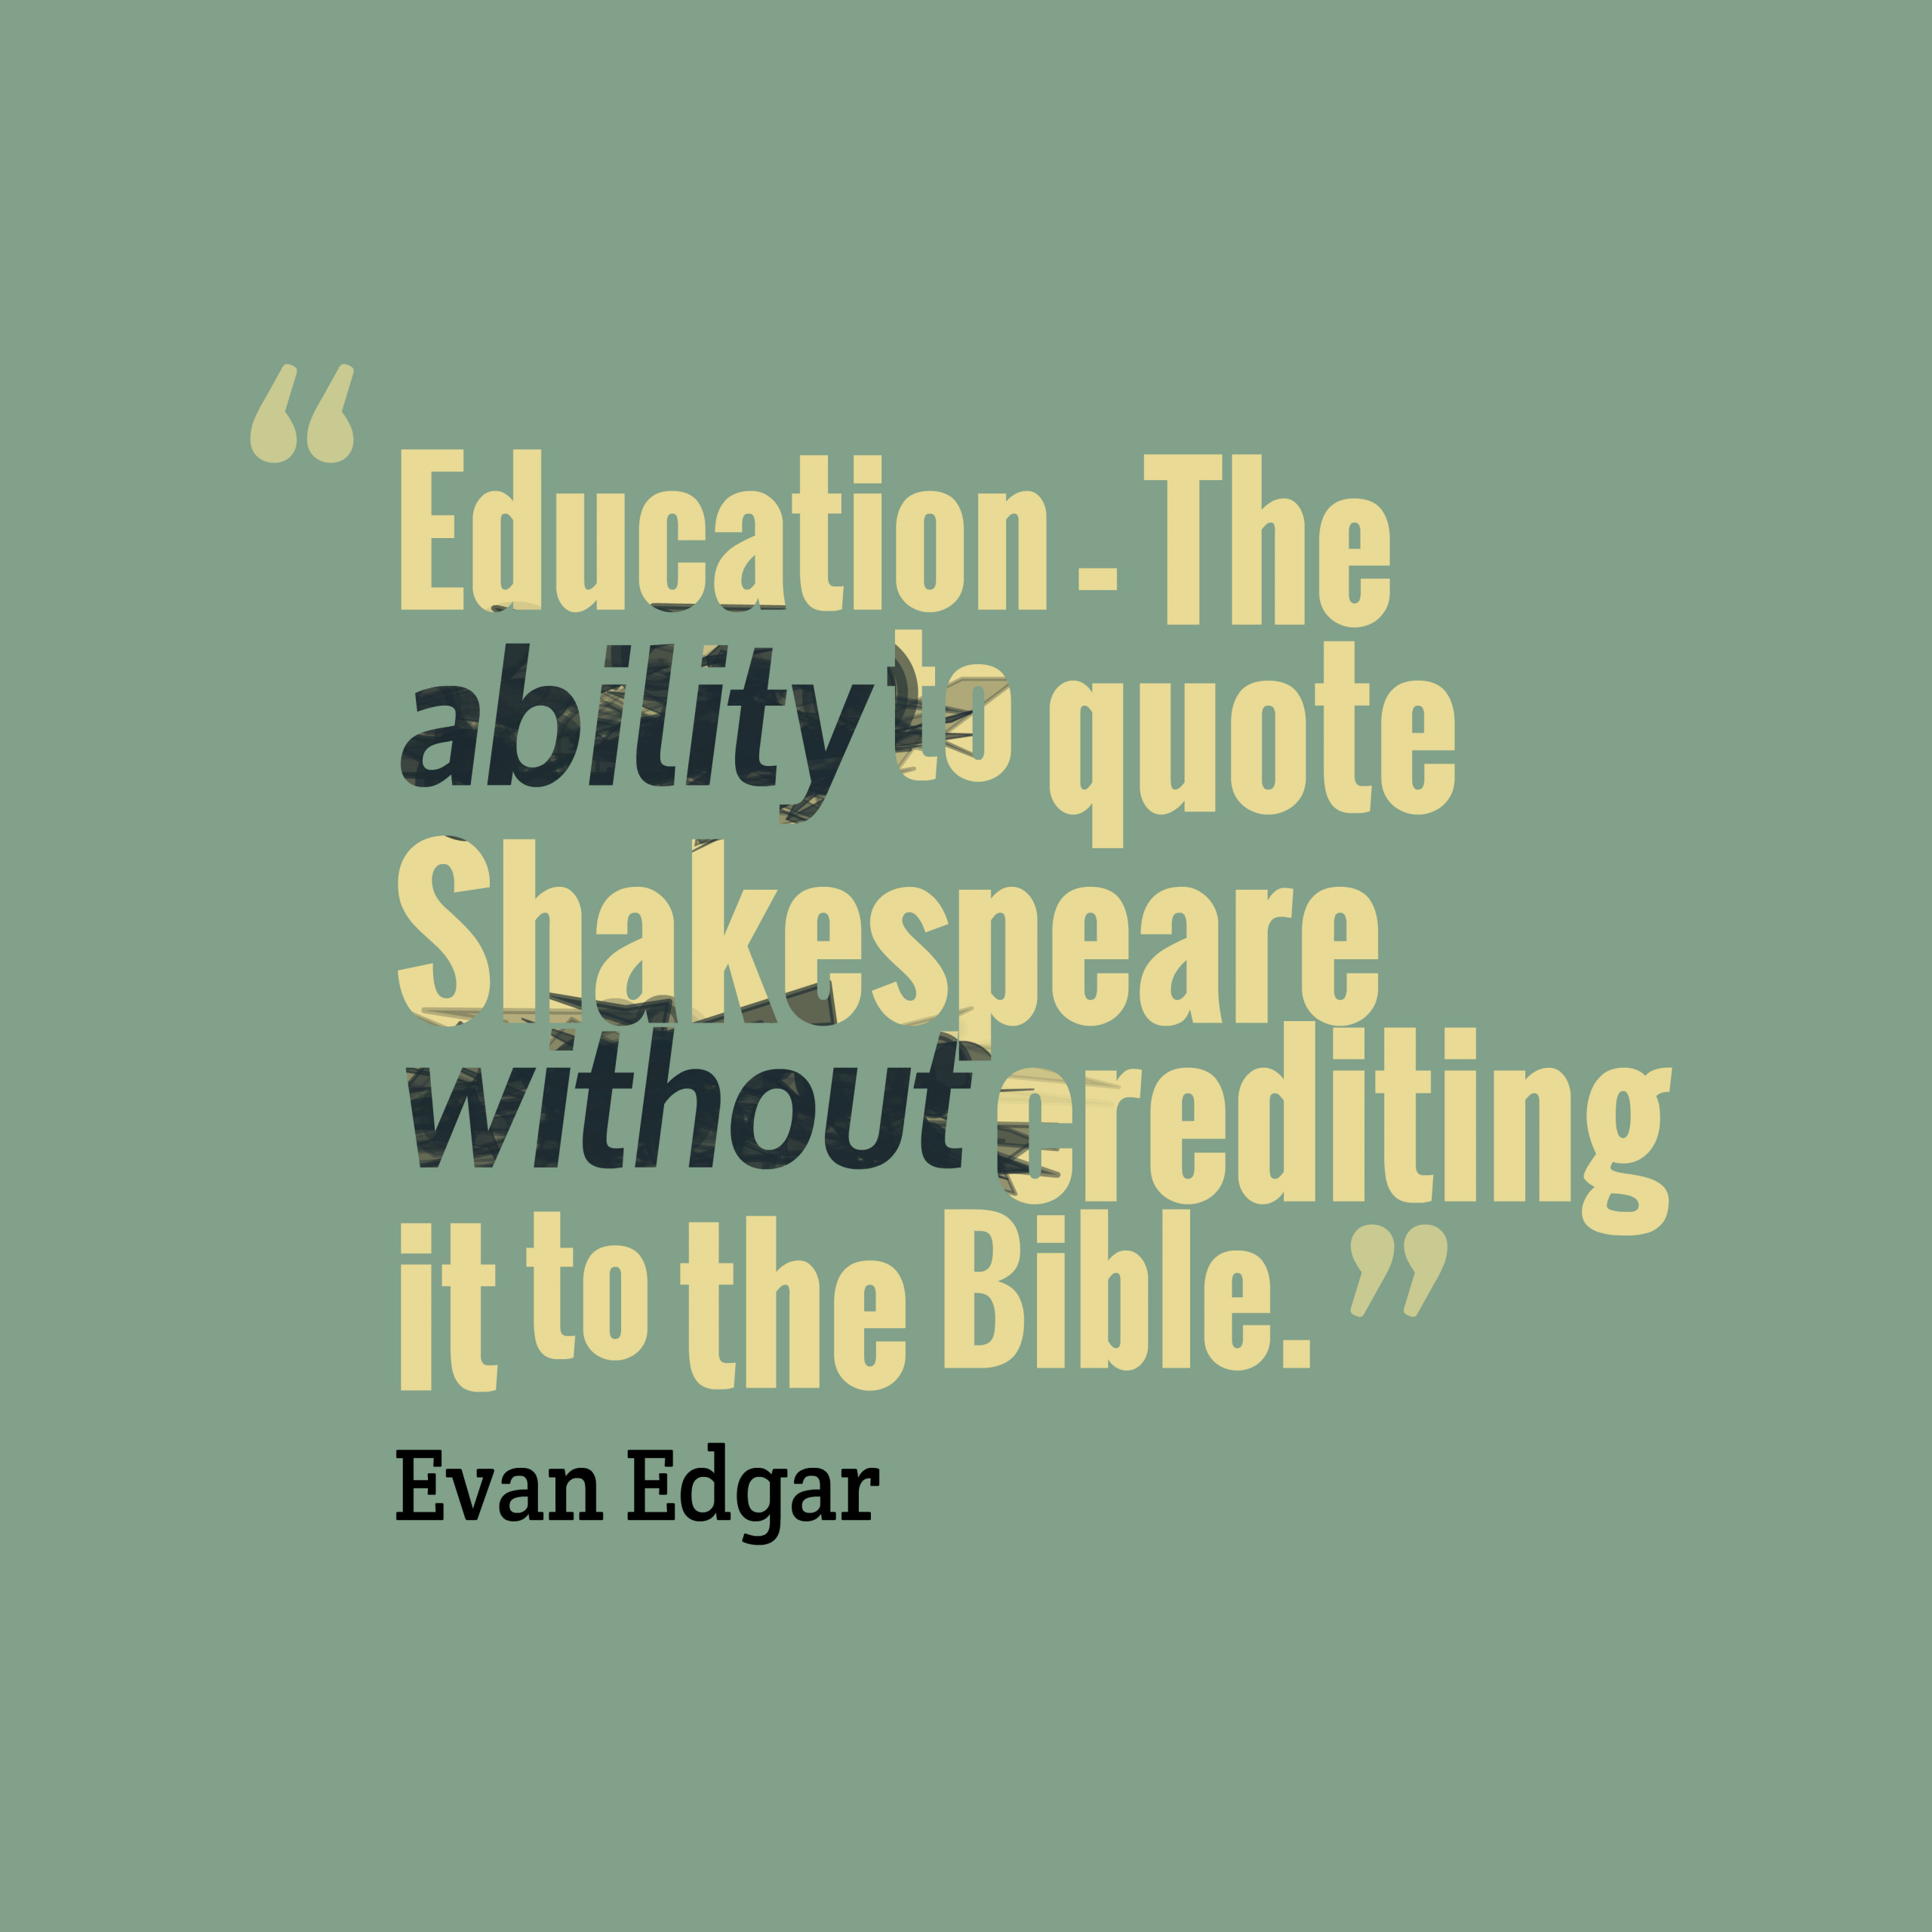 Bible Quotes About Education
 Get high resolution using text from Education – The